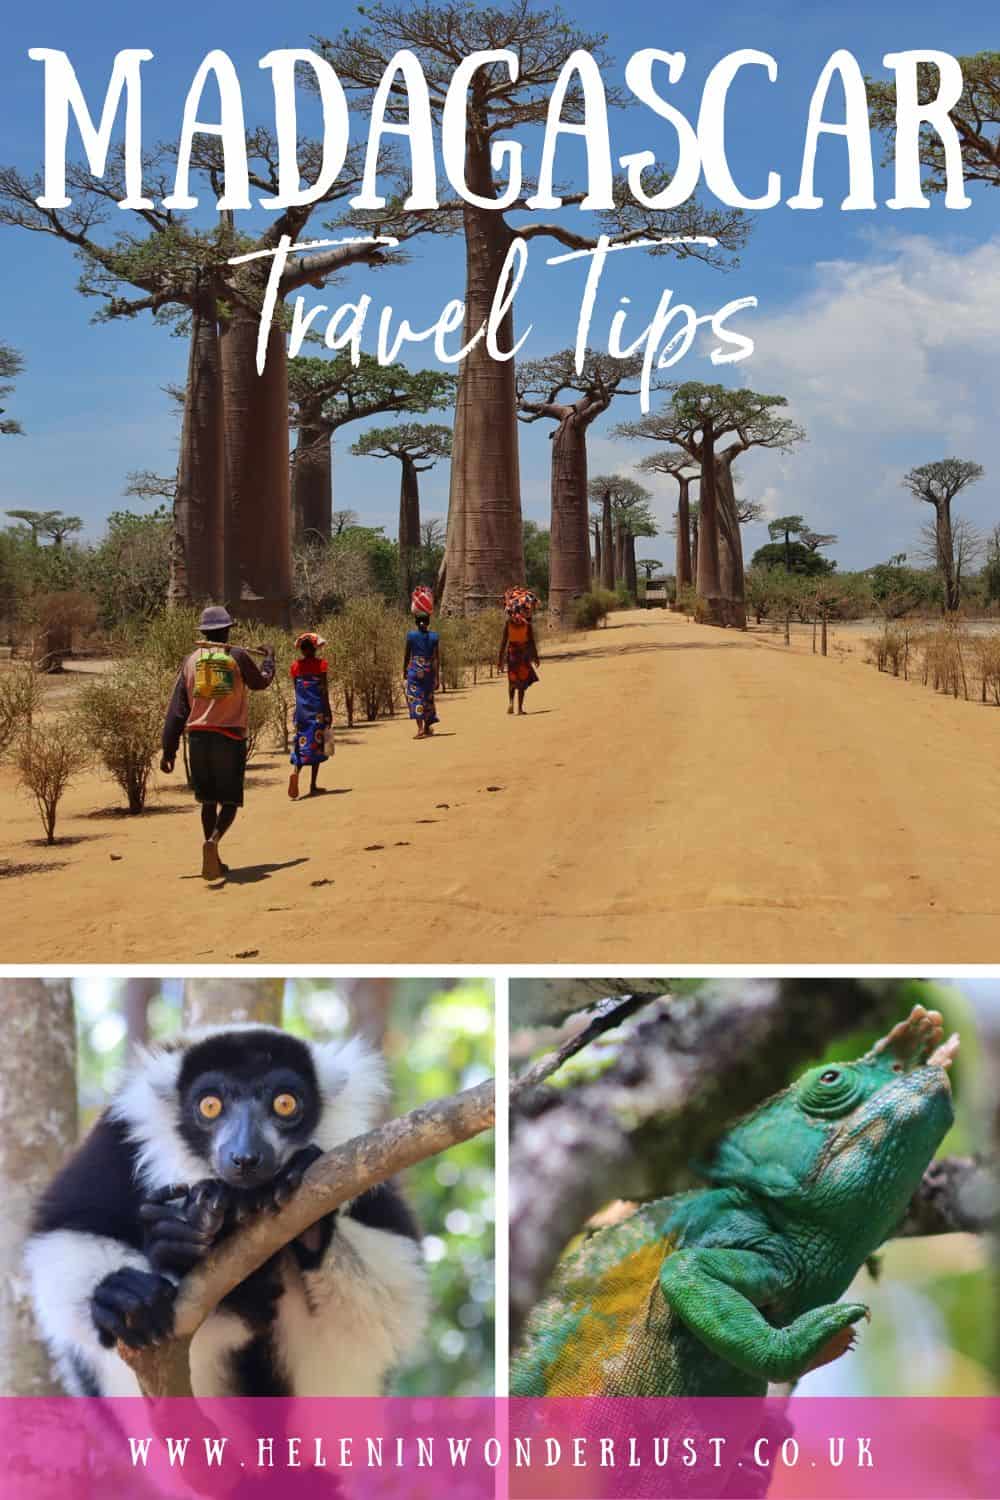 Madagascar Travel Tips - Things to Know Before You Visit